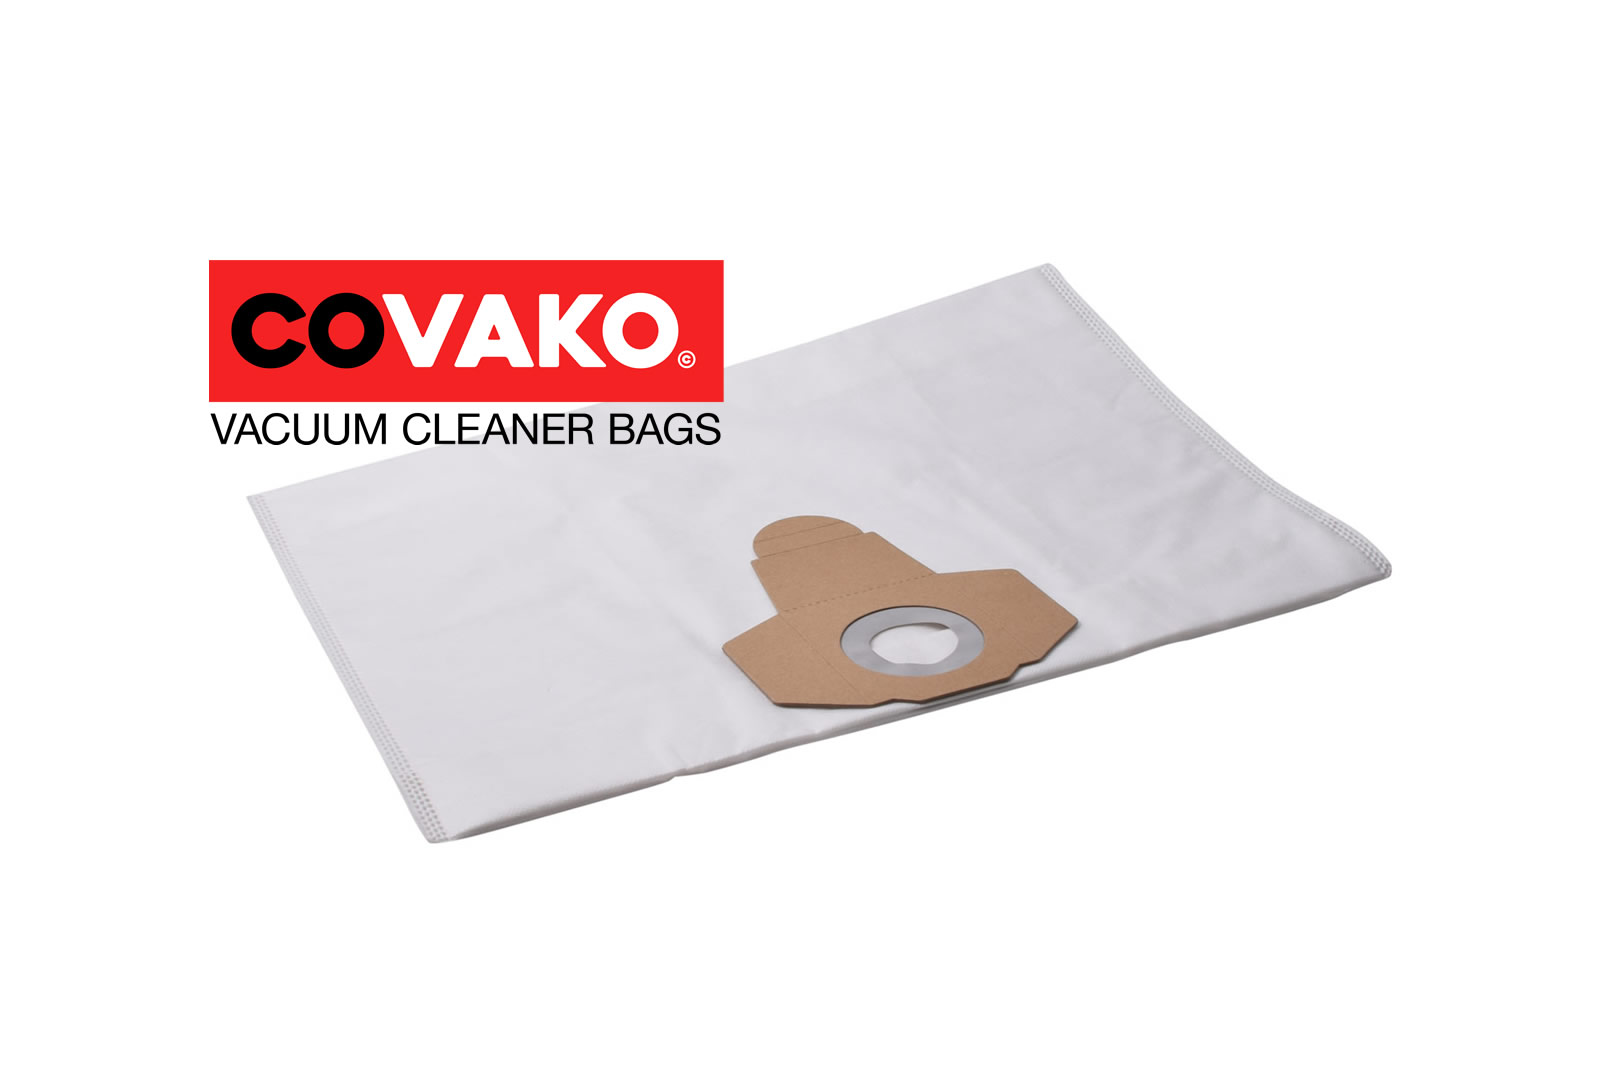 Einhell TE-VC 36/30 Li S-Solo / Synthesis - Einhell vacuum cleaner bags